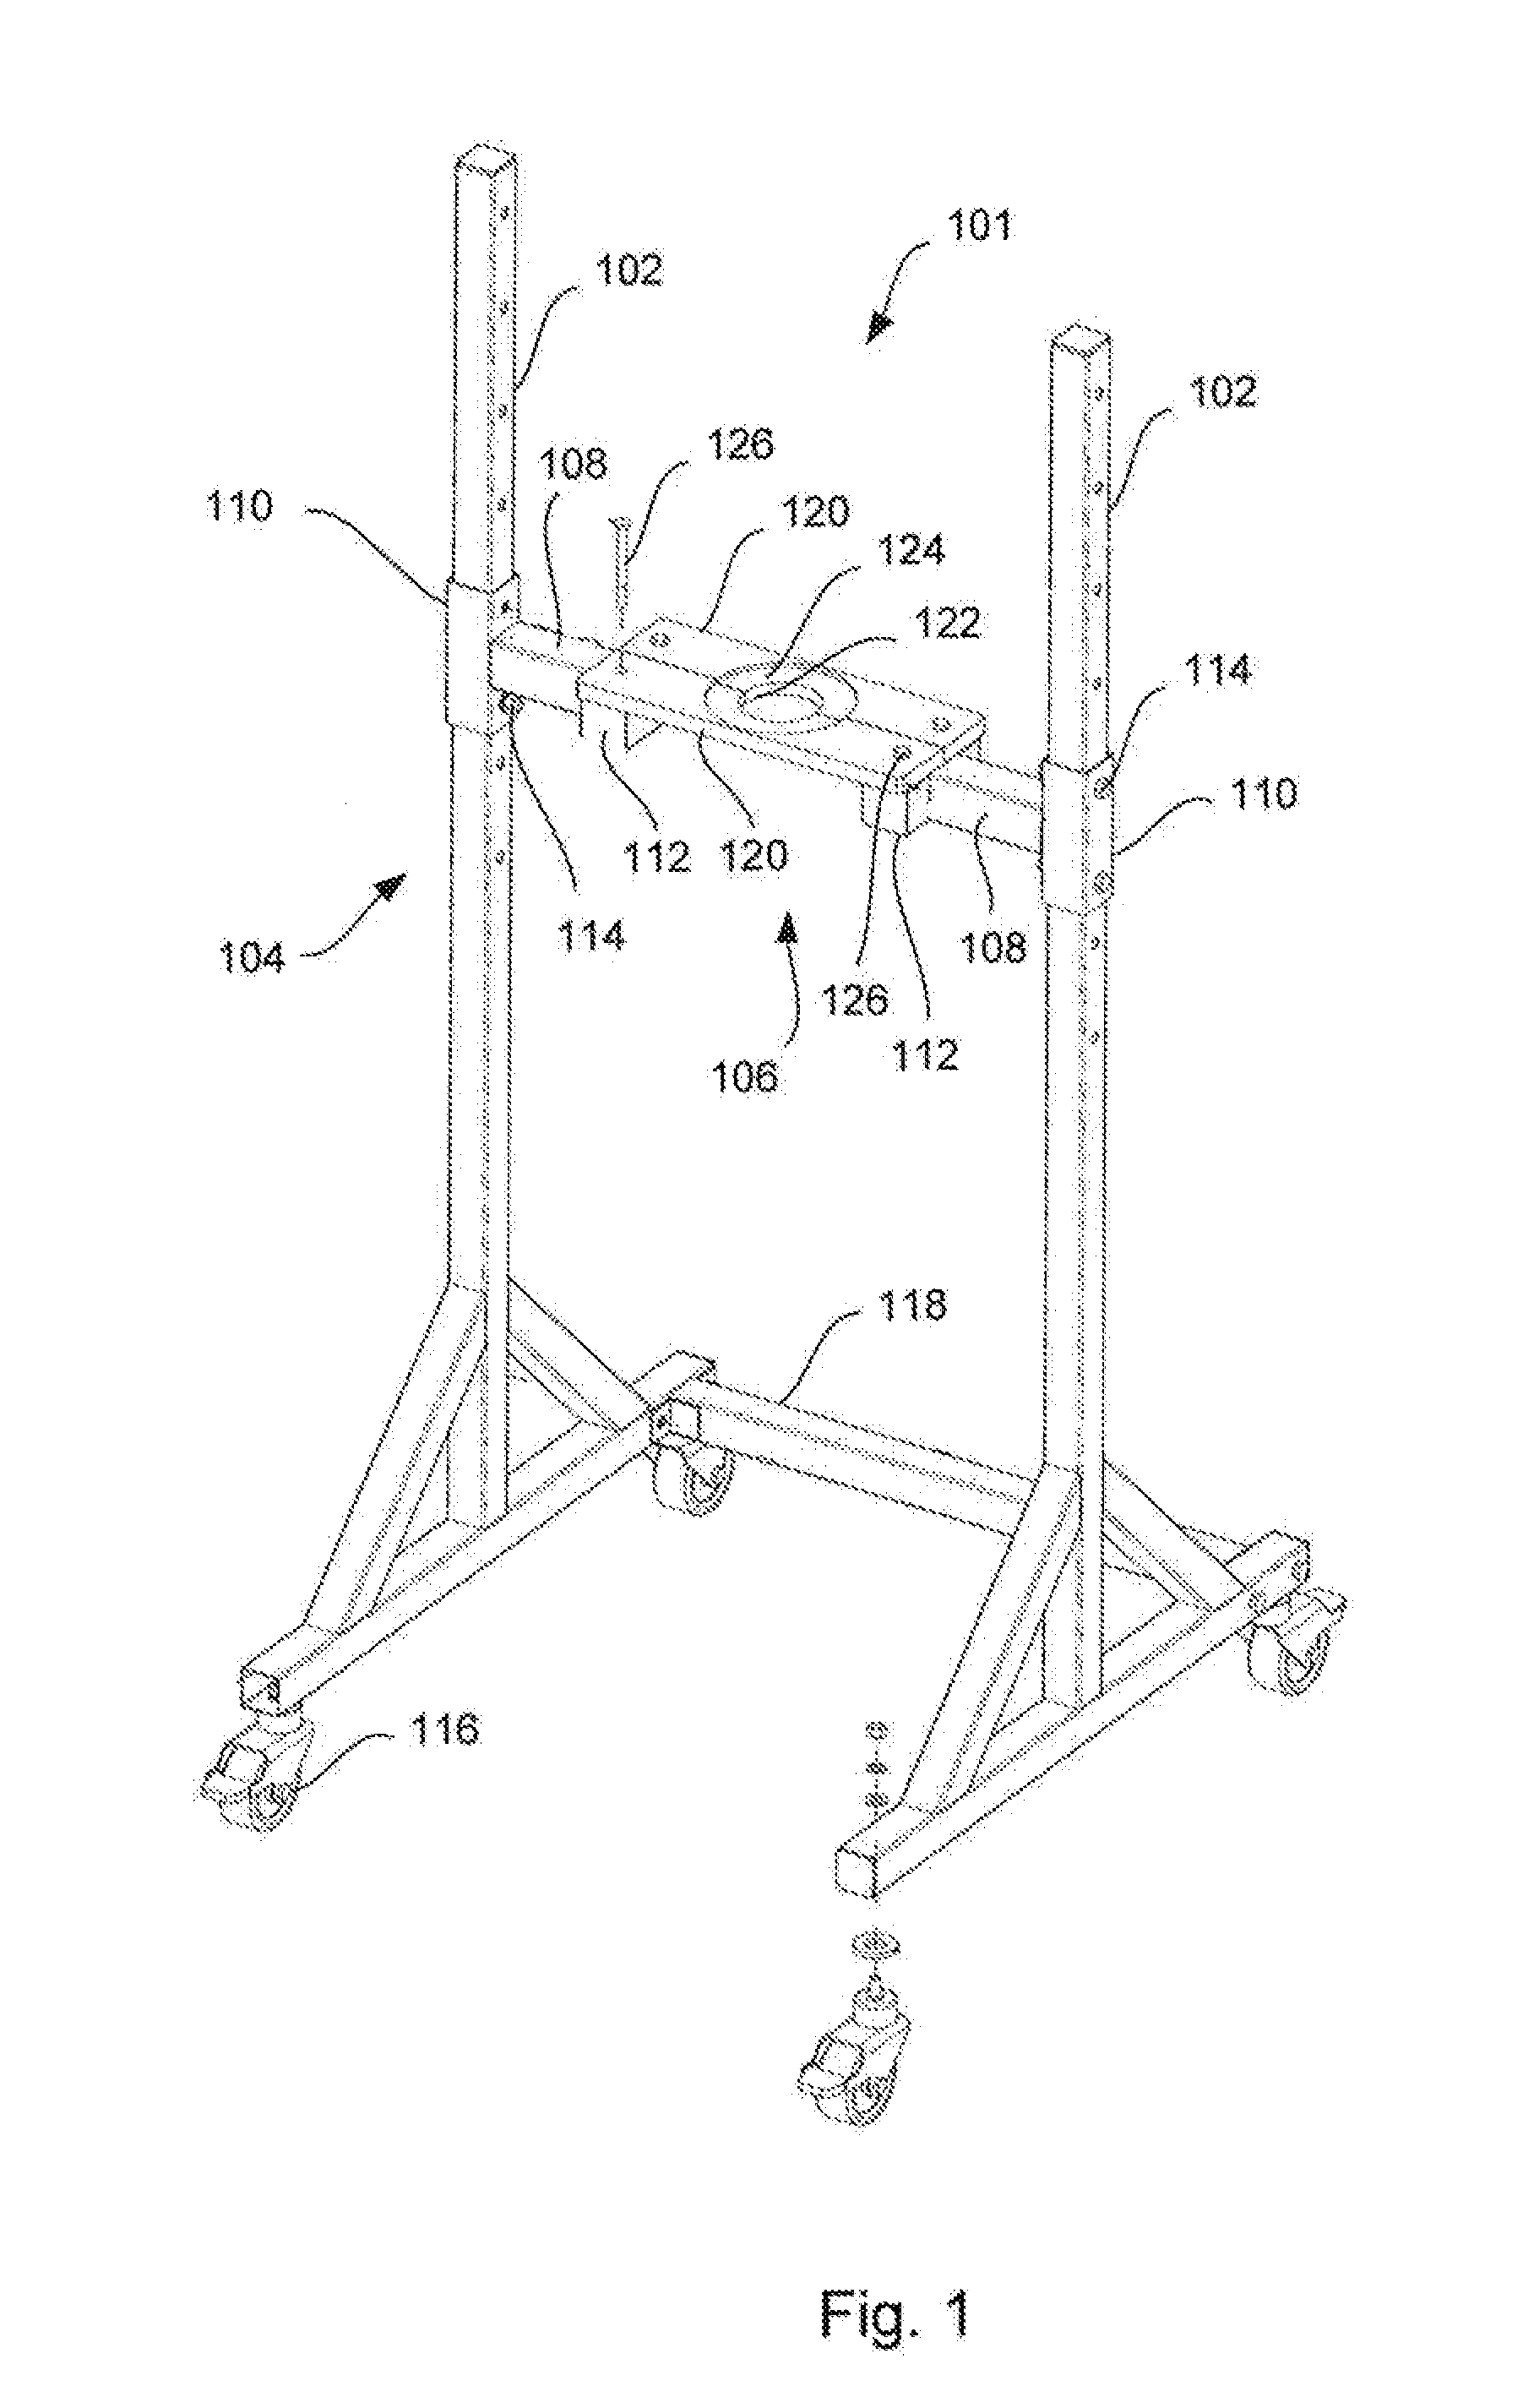 Chromatography column frame and method of conducting maintenance on and packing of a chromatography column